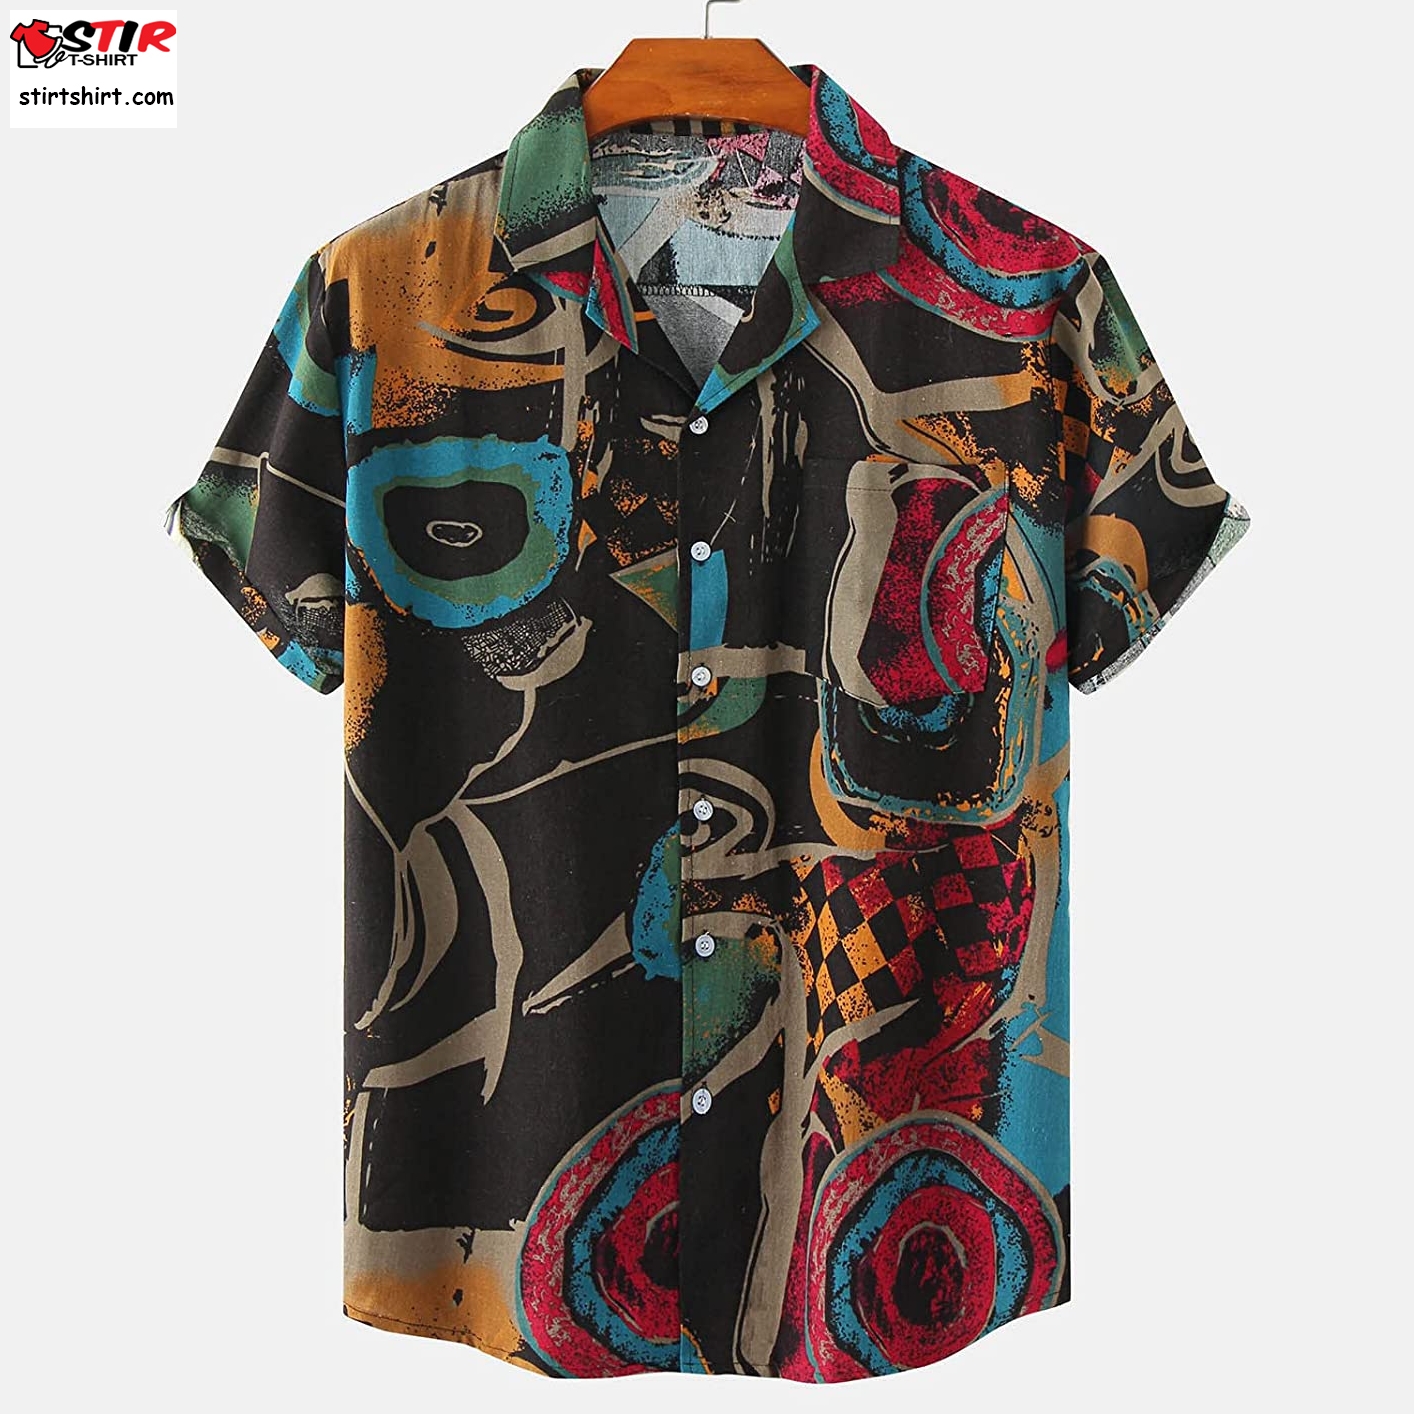 Meoilce Plus Size Hawaiian Shirt For Men Short Sleeve Button Down Regular Fit Shirt  Tucked In 